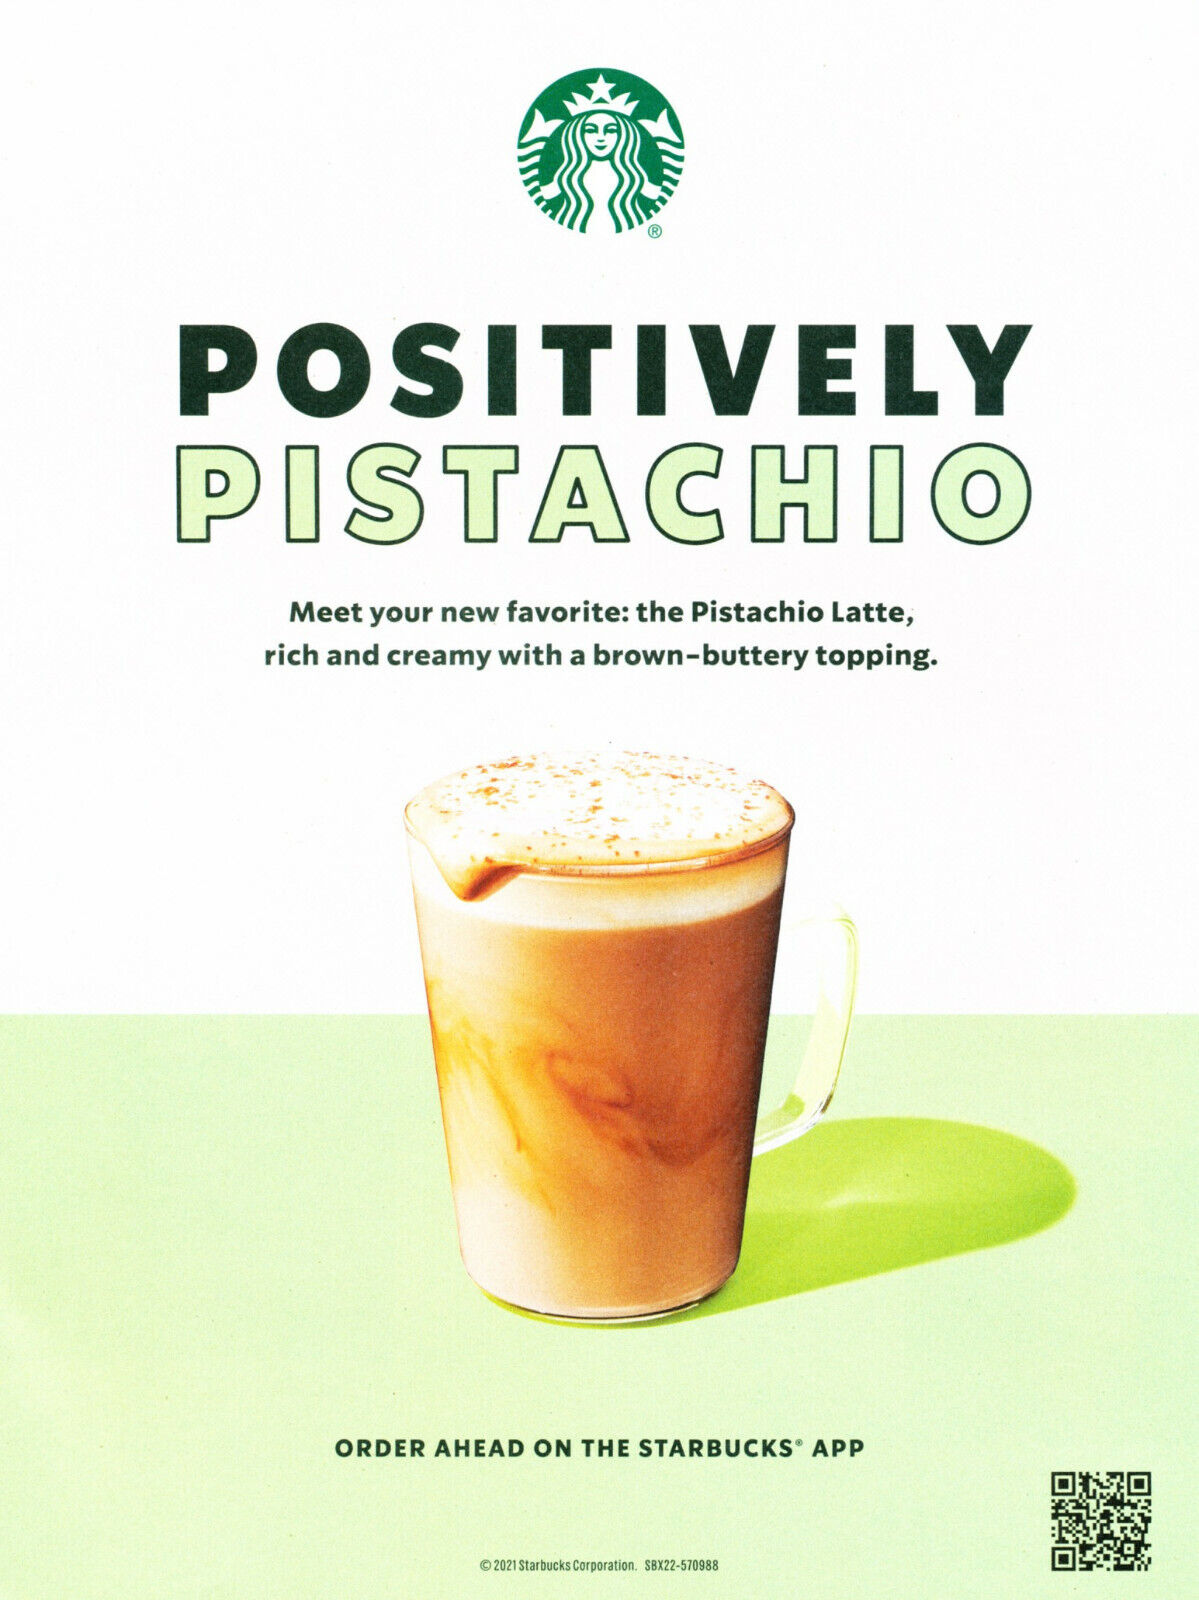 STARBUCKS COFFEE AD #77 RARE 2021 OUT OF PRINT MAGAZINE AD POSITIVELY PISTACHIO